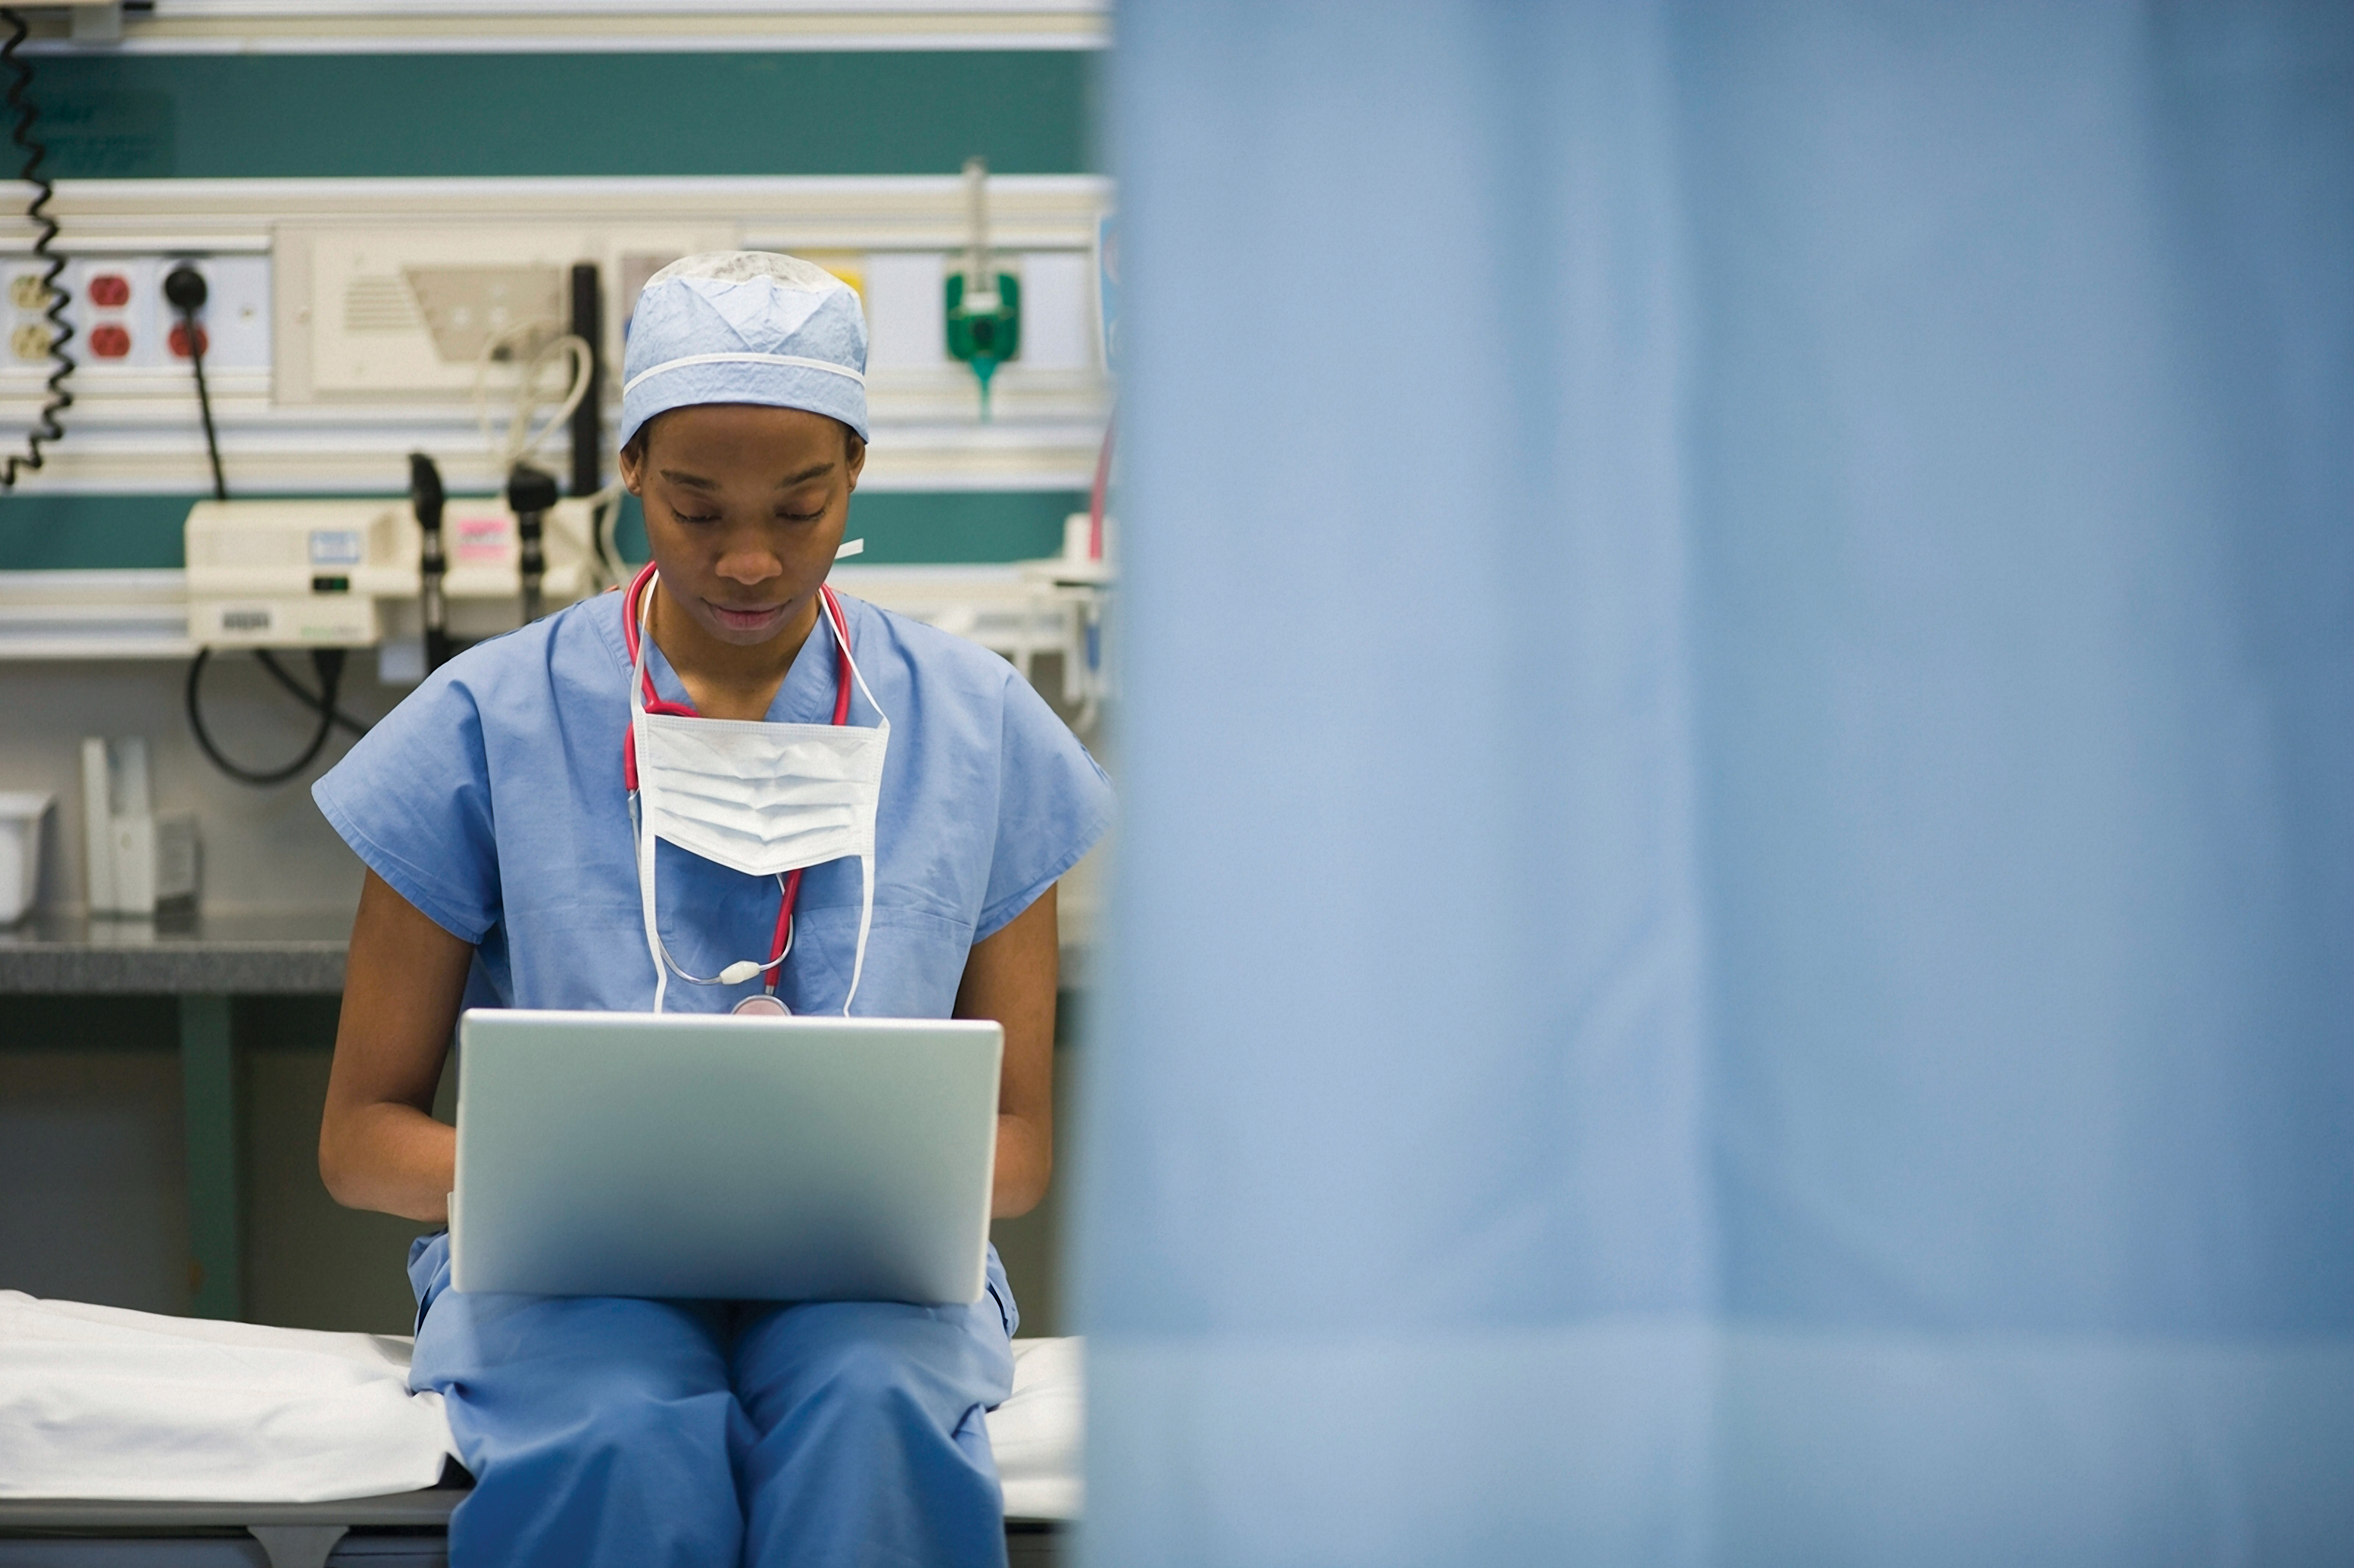 5 Reasons to Earn your MS in Nursing by 2025